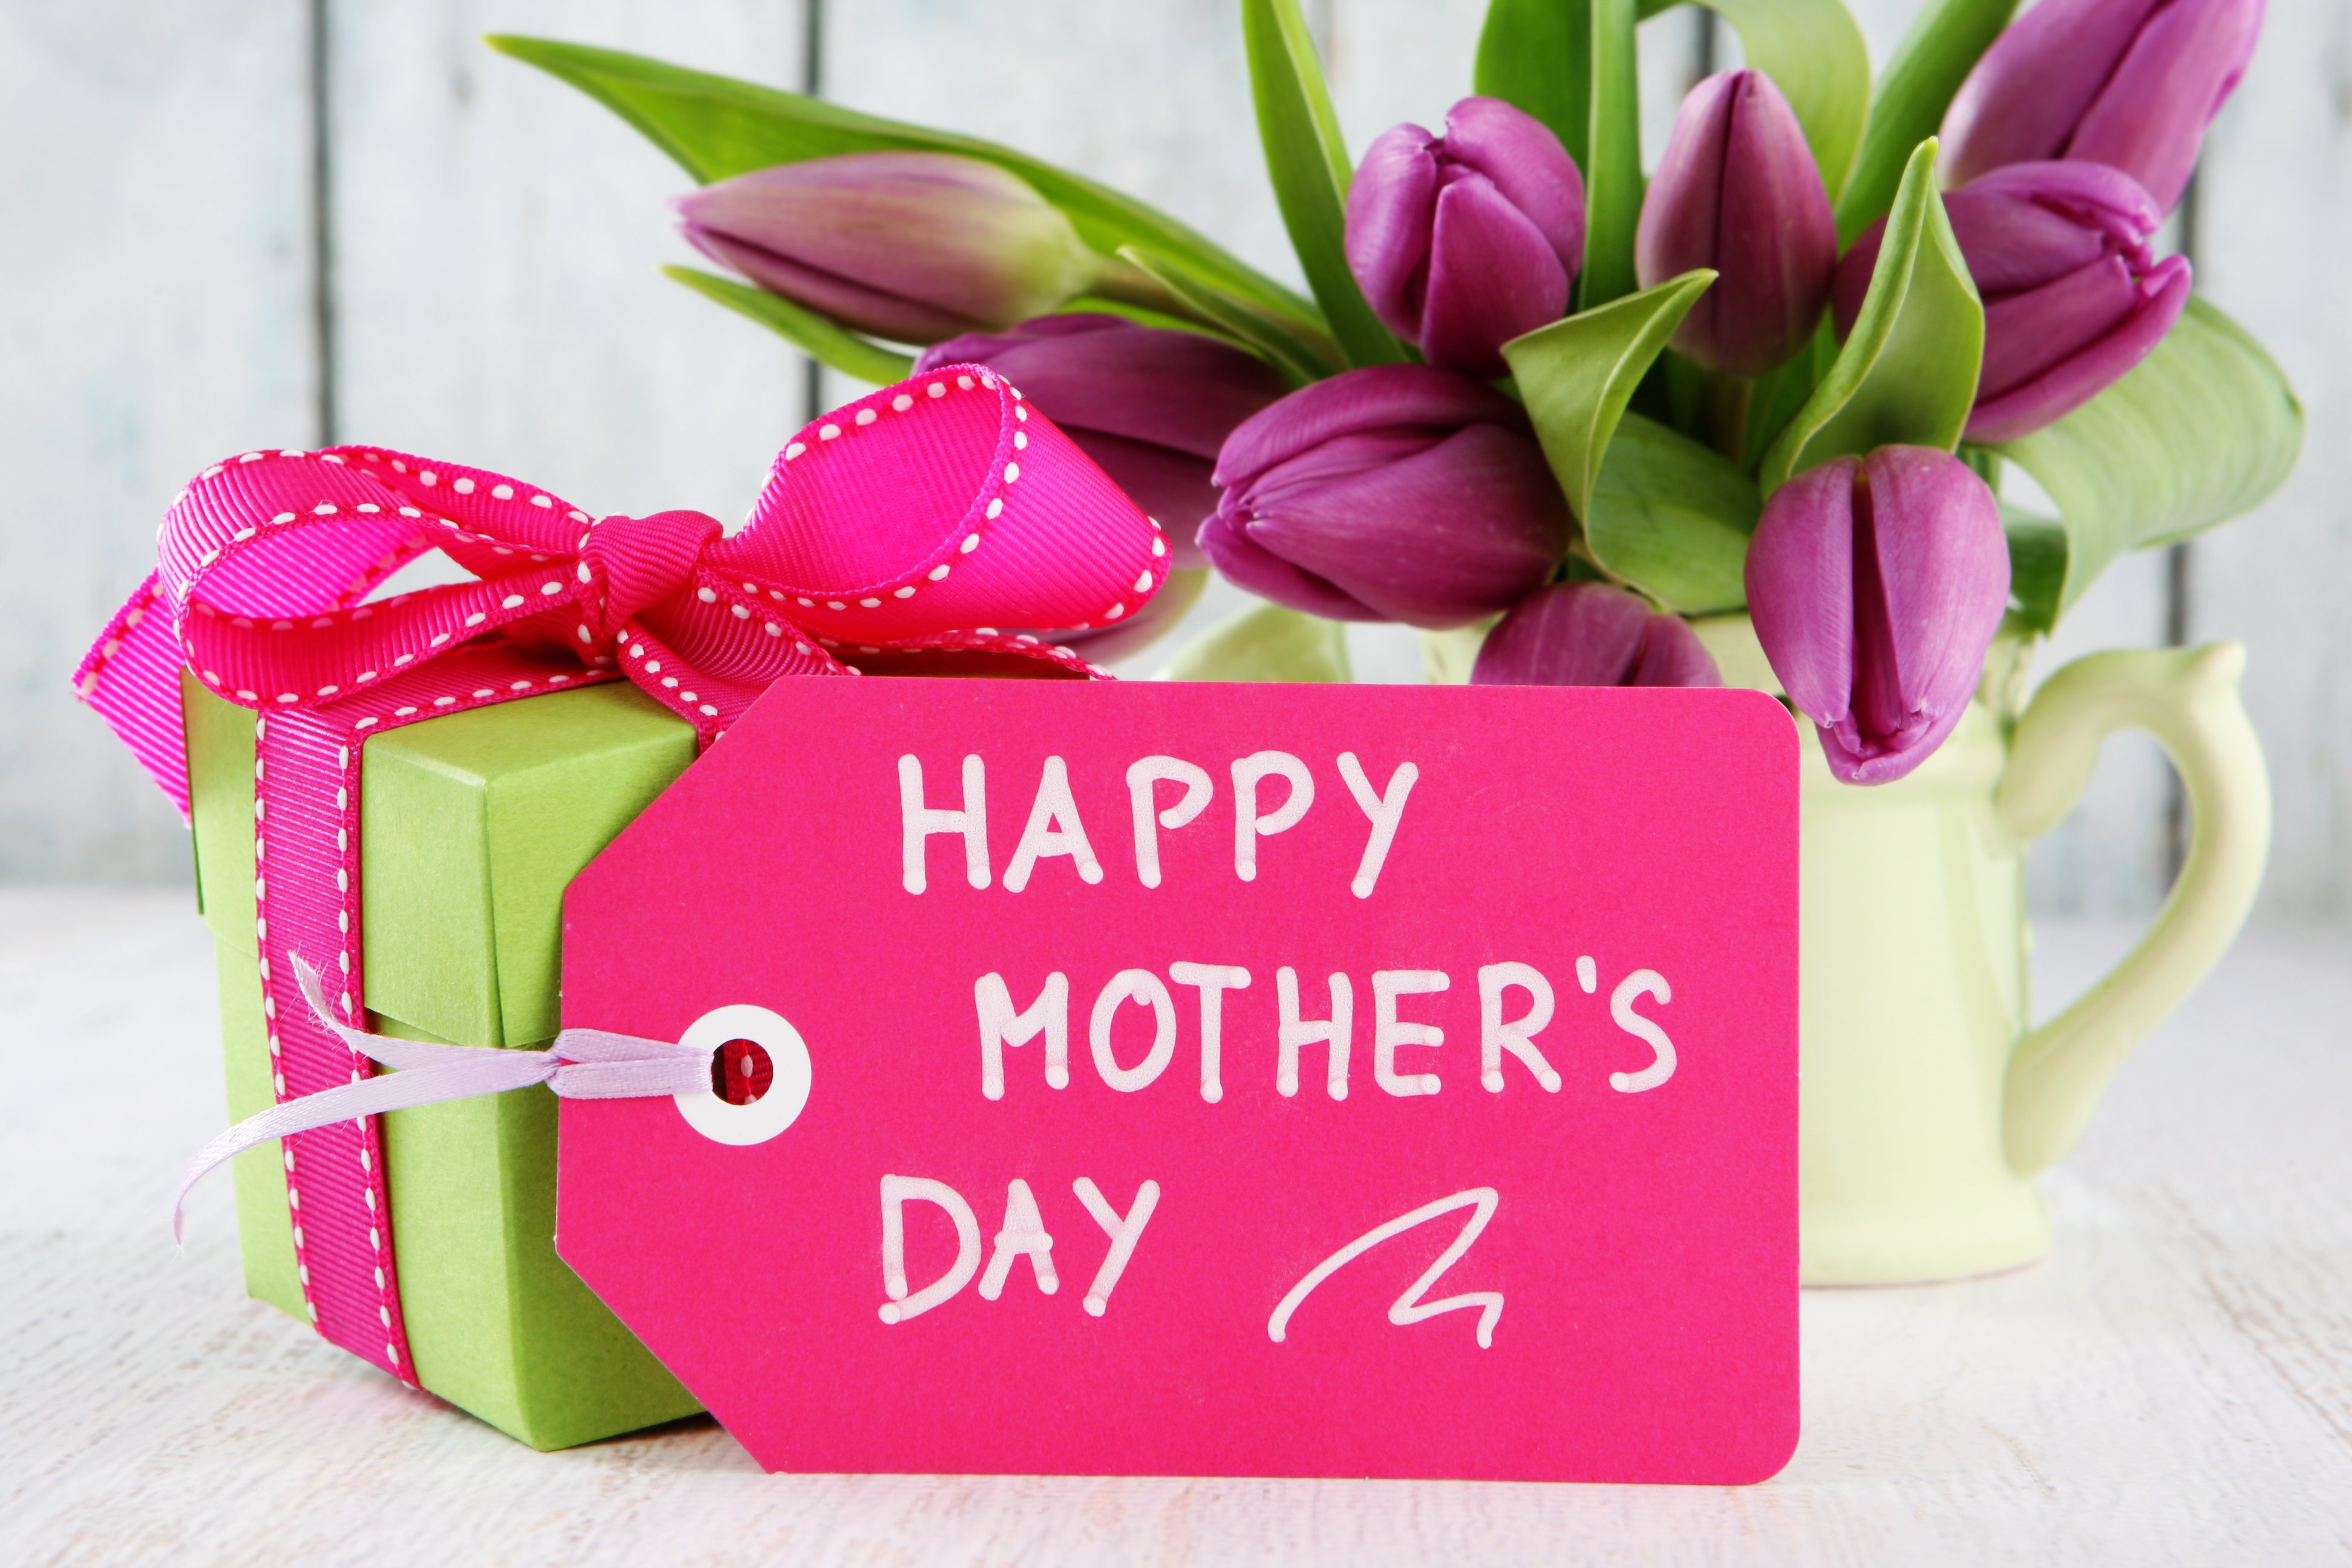 Wishing all of you moms out there a very HAPPY MOTHER'S DAY! 